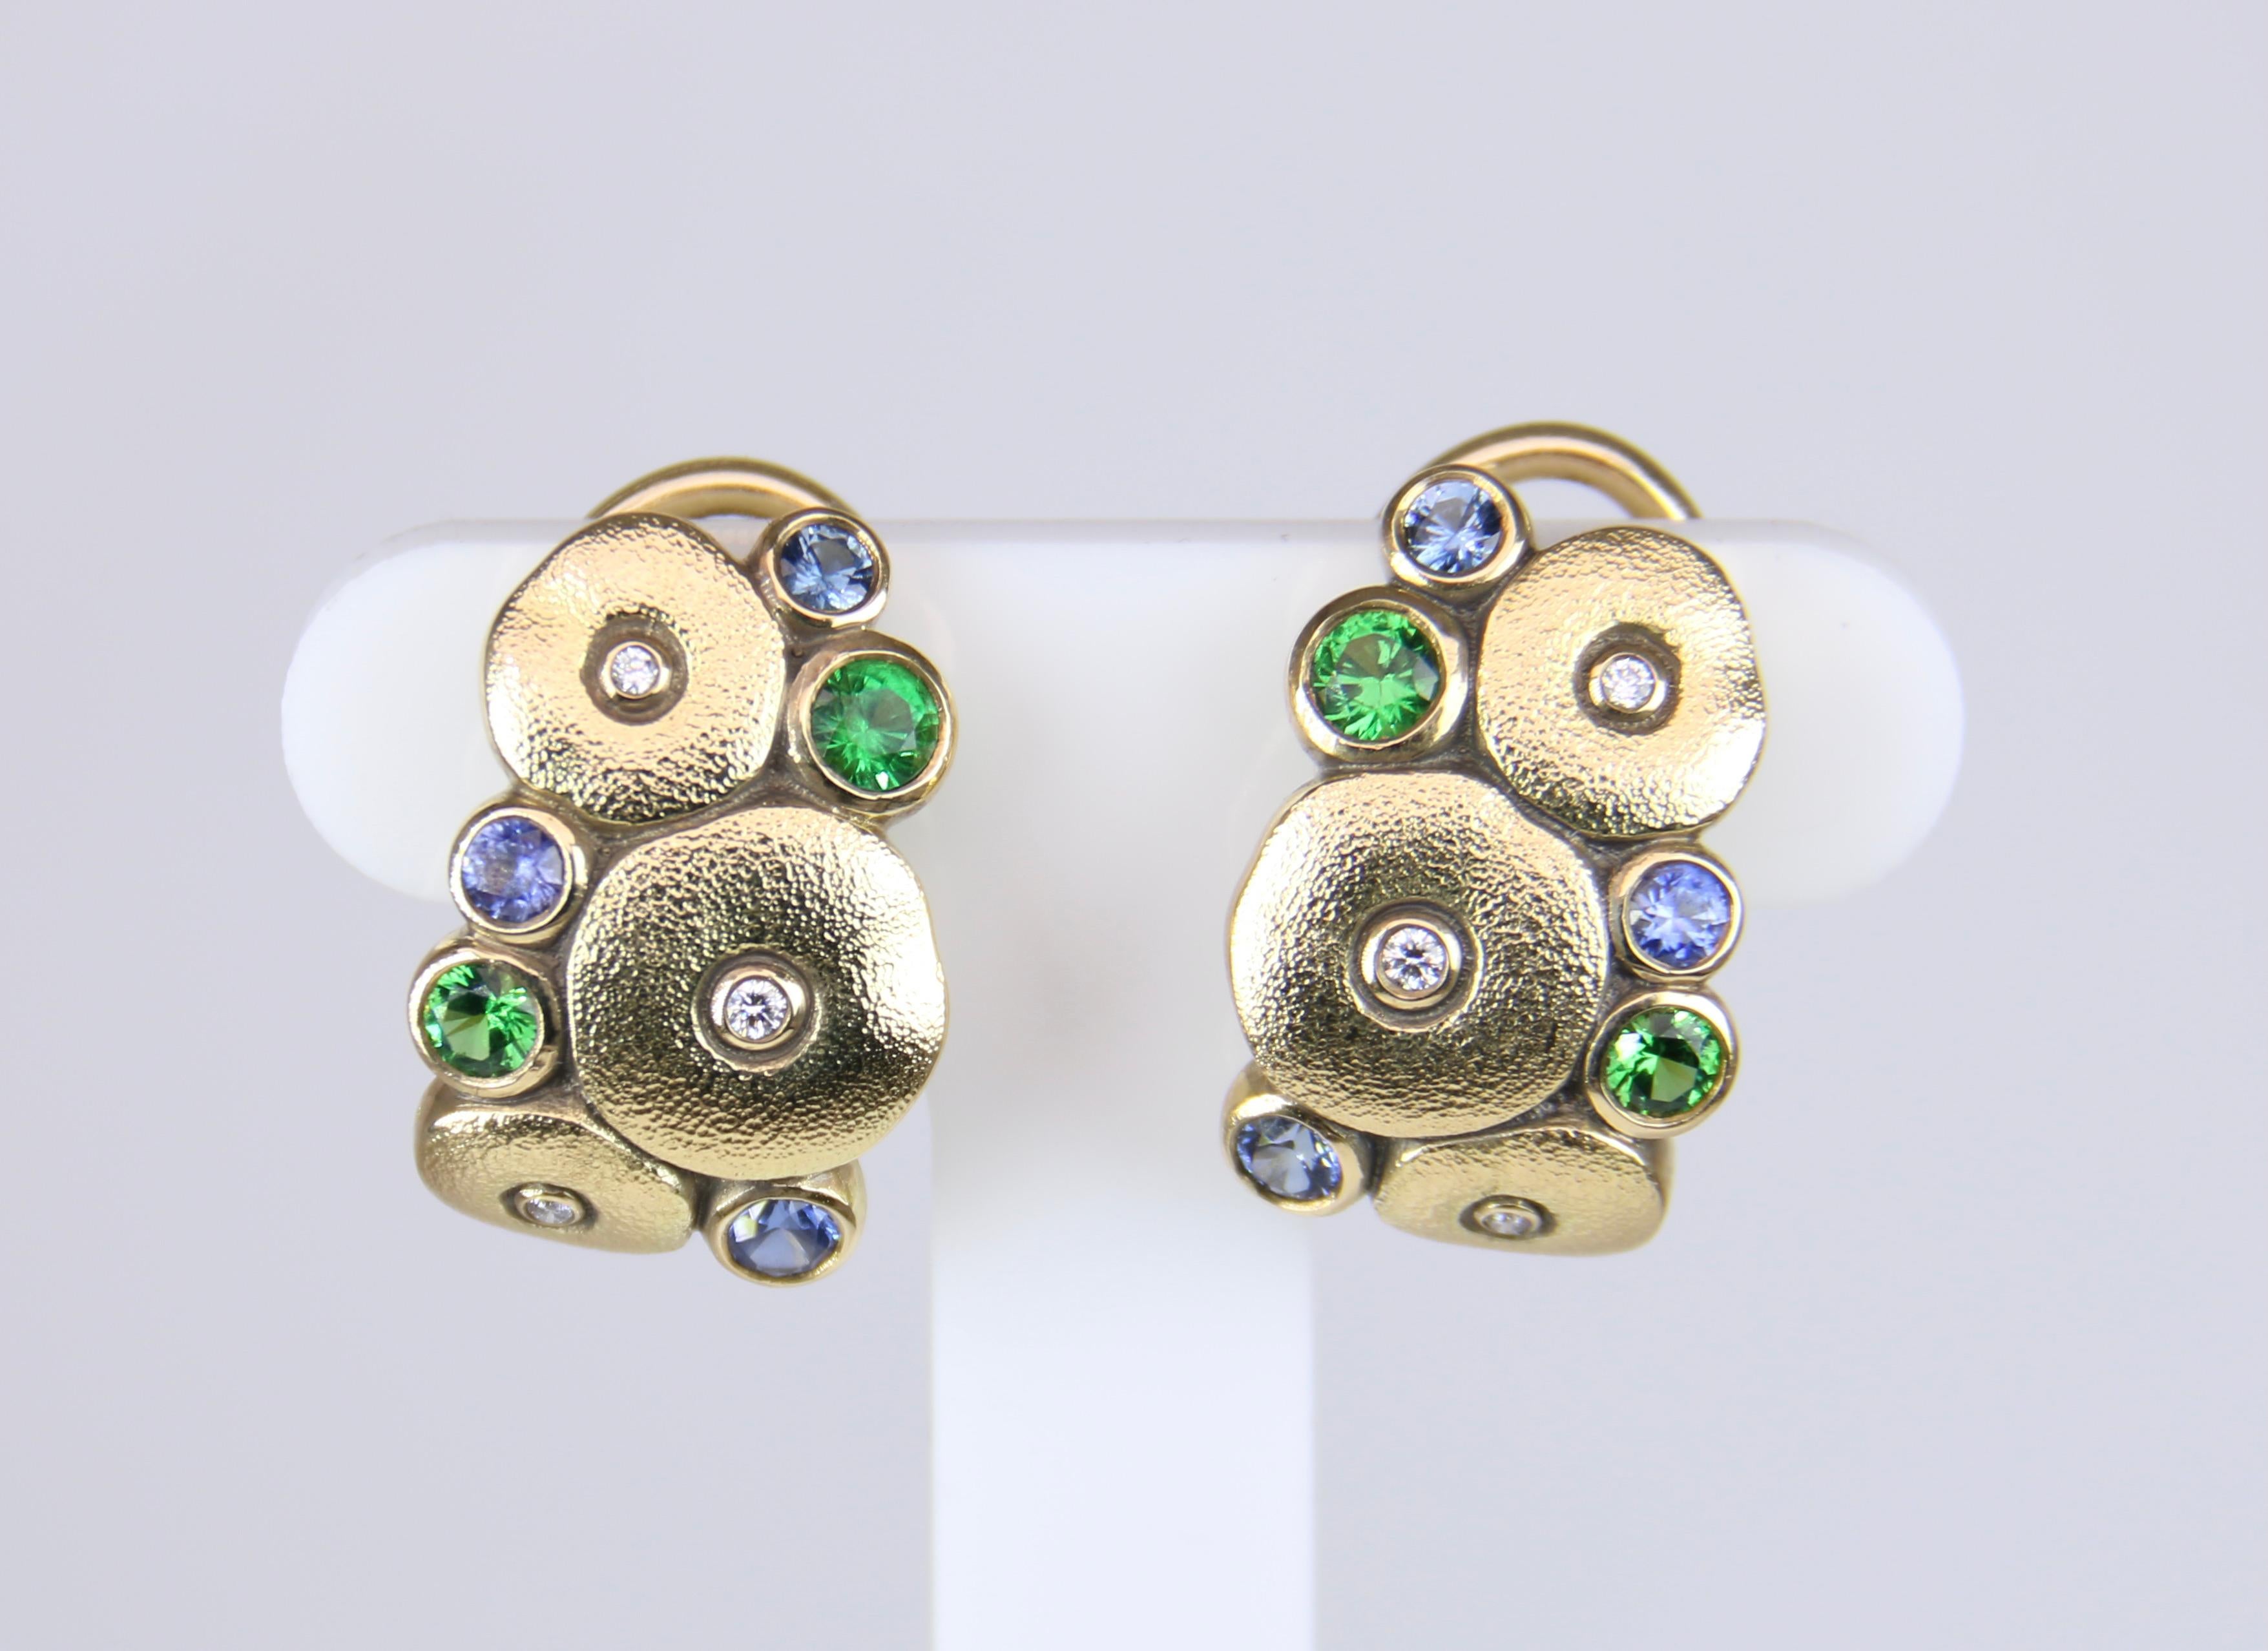 These “Orchard” earrings showcase 6 diamonds (0.04ct.) 4 tsavorite and 6 sapphires (0.60ct.) in 18k Gold. The “Orchard” collection from Alex Sepkus combines the beauty of Diamonds, Tsavorites, and Sapphires with effortless elegance.